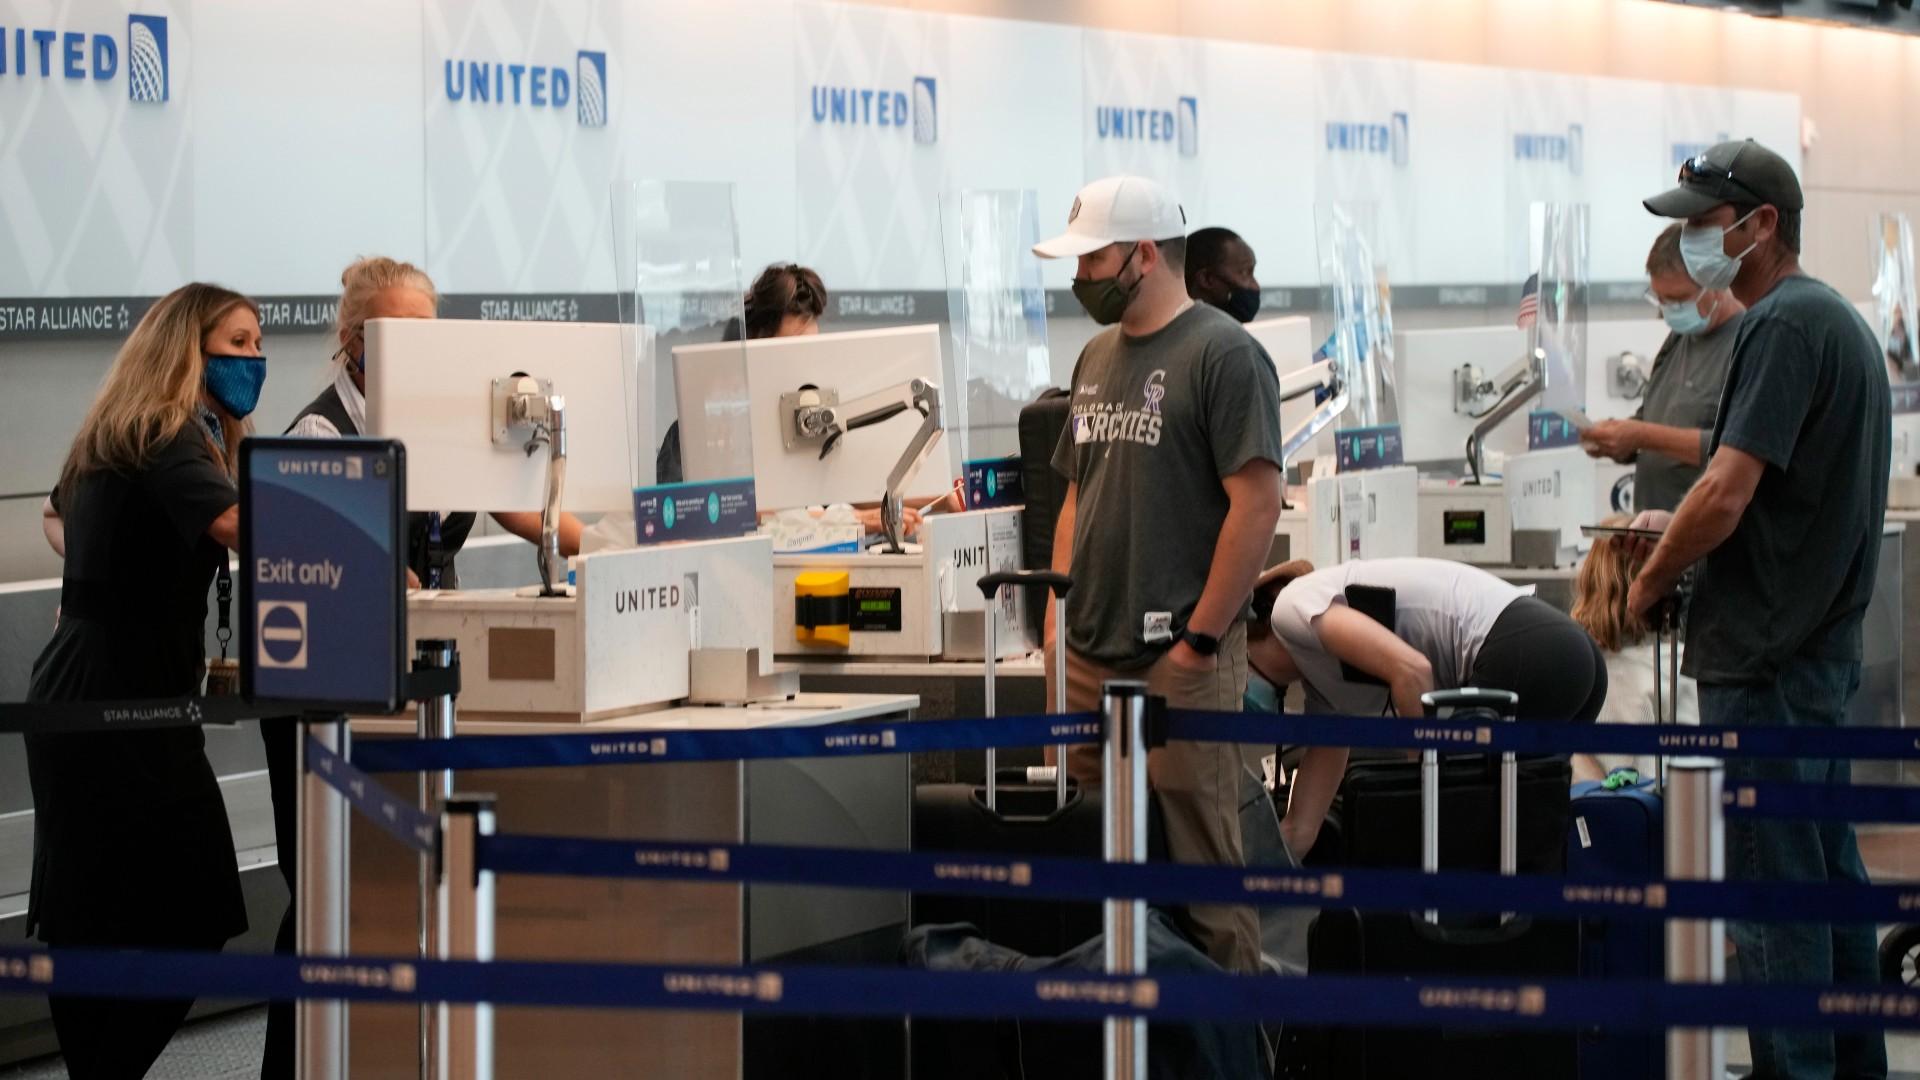 Travelers well up as agents confer at the United Airlines ticketing counter in Denver International Airport Friday, July 2, 2021, in Denver. (AP Photo / David Zalubowski, File)